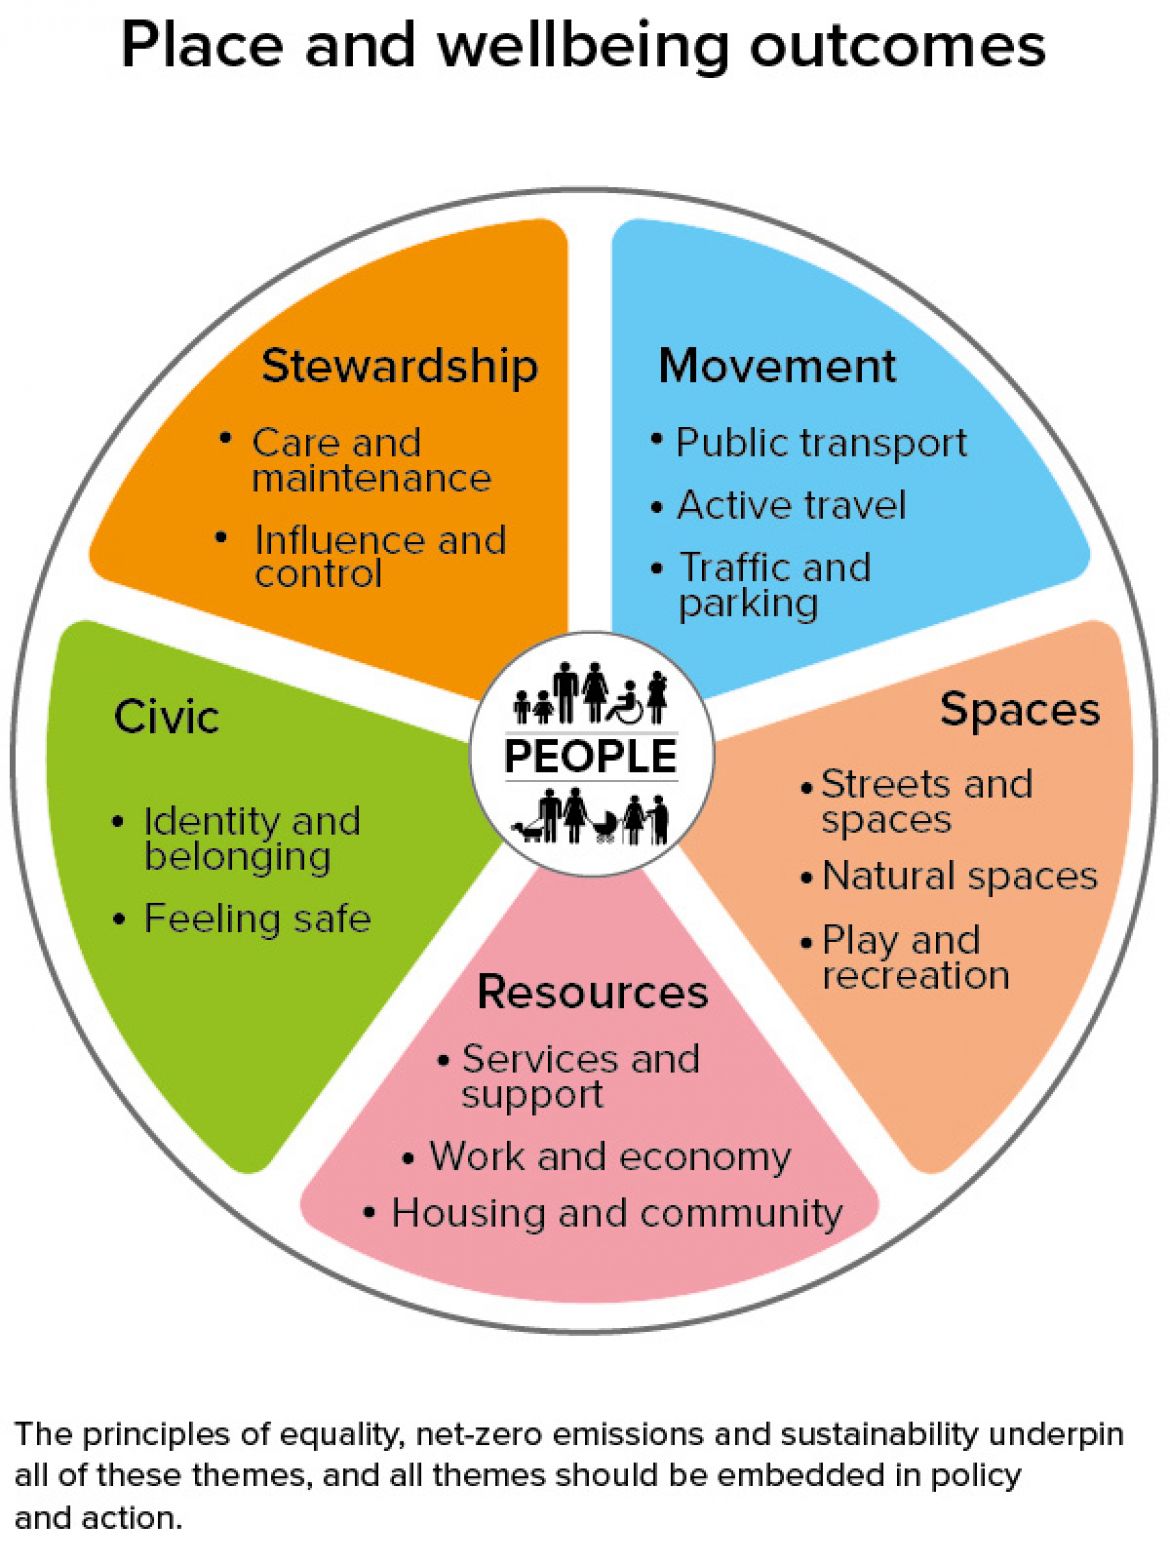 Place and wellbeing outcomes: movement, space, resources, civic, stewardship